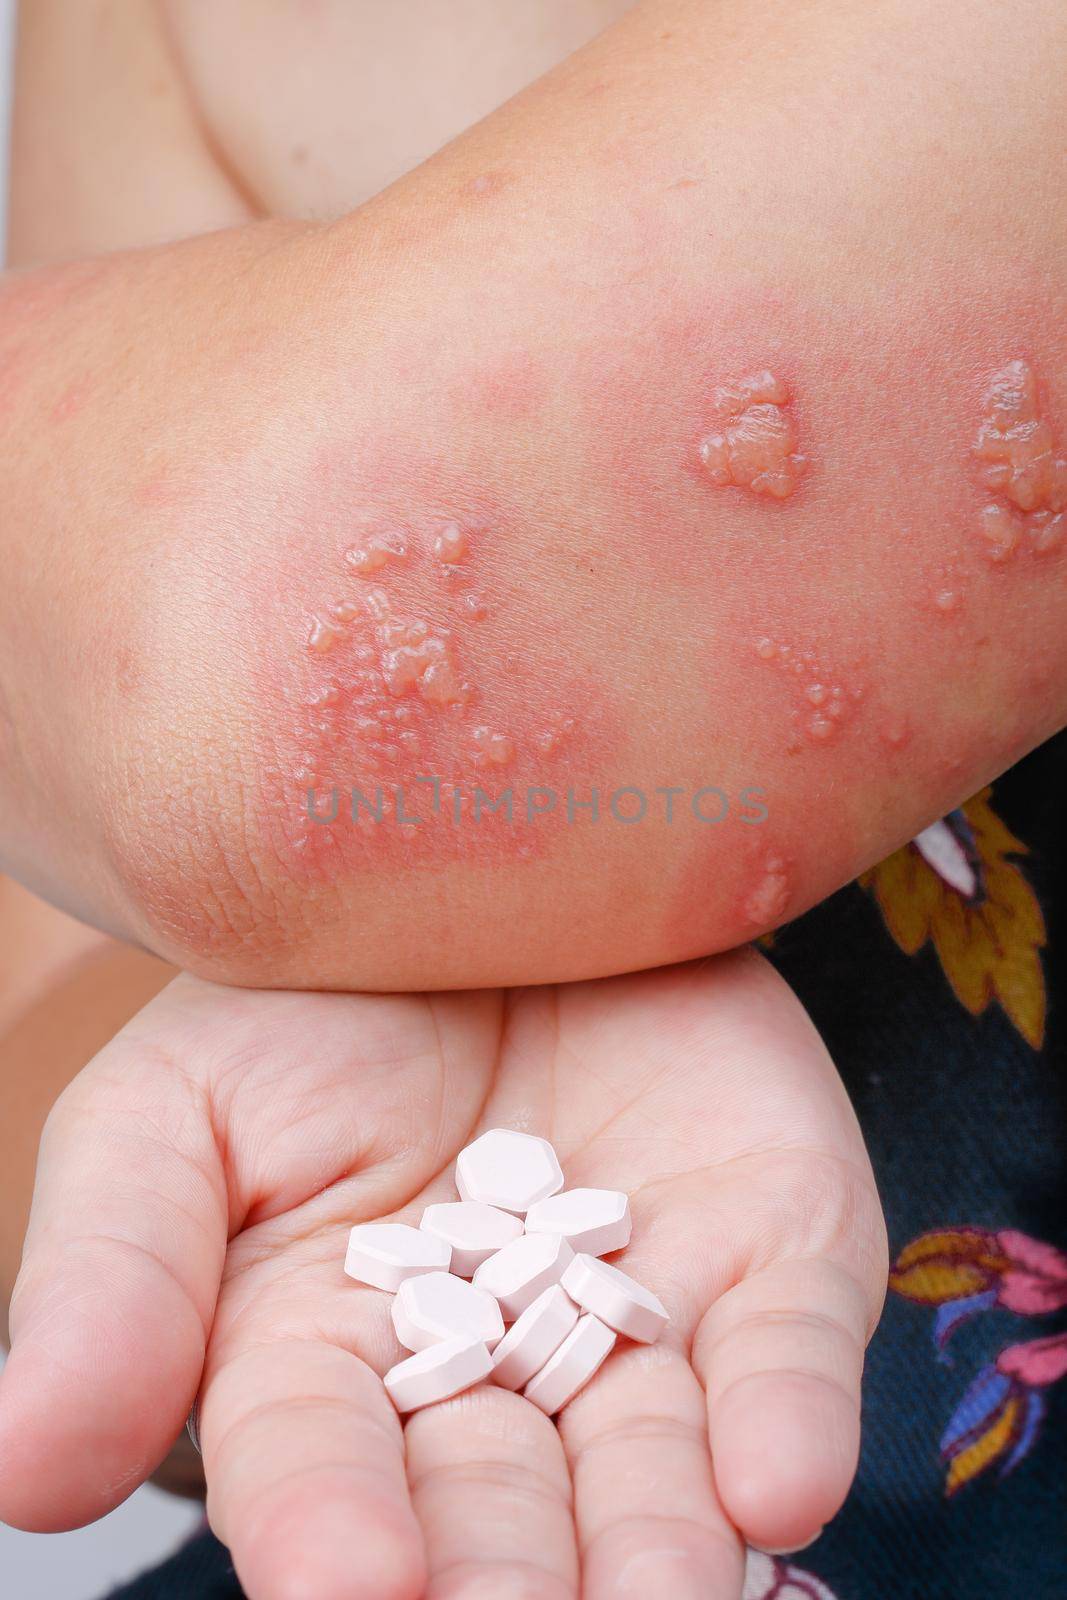 Shingles, Zoster or Herpes Zoster symptoms with antiviral drug by toa55